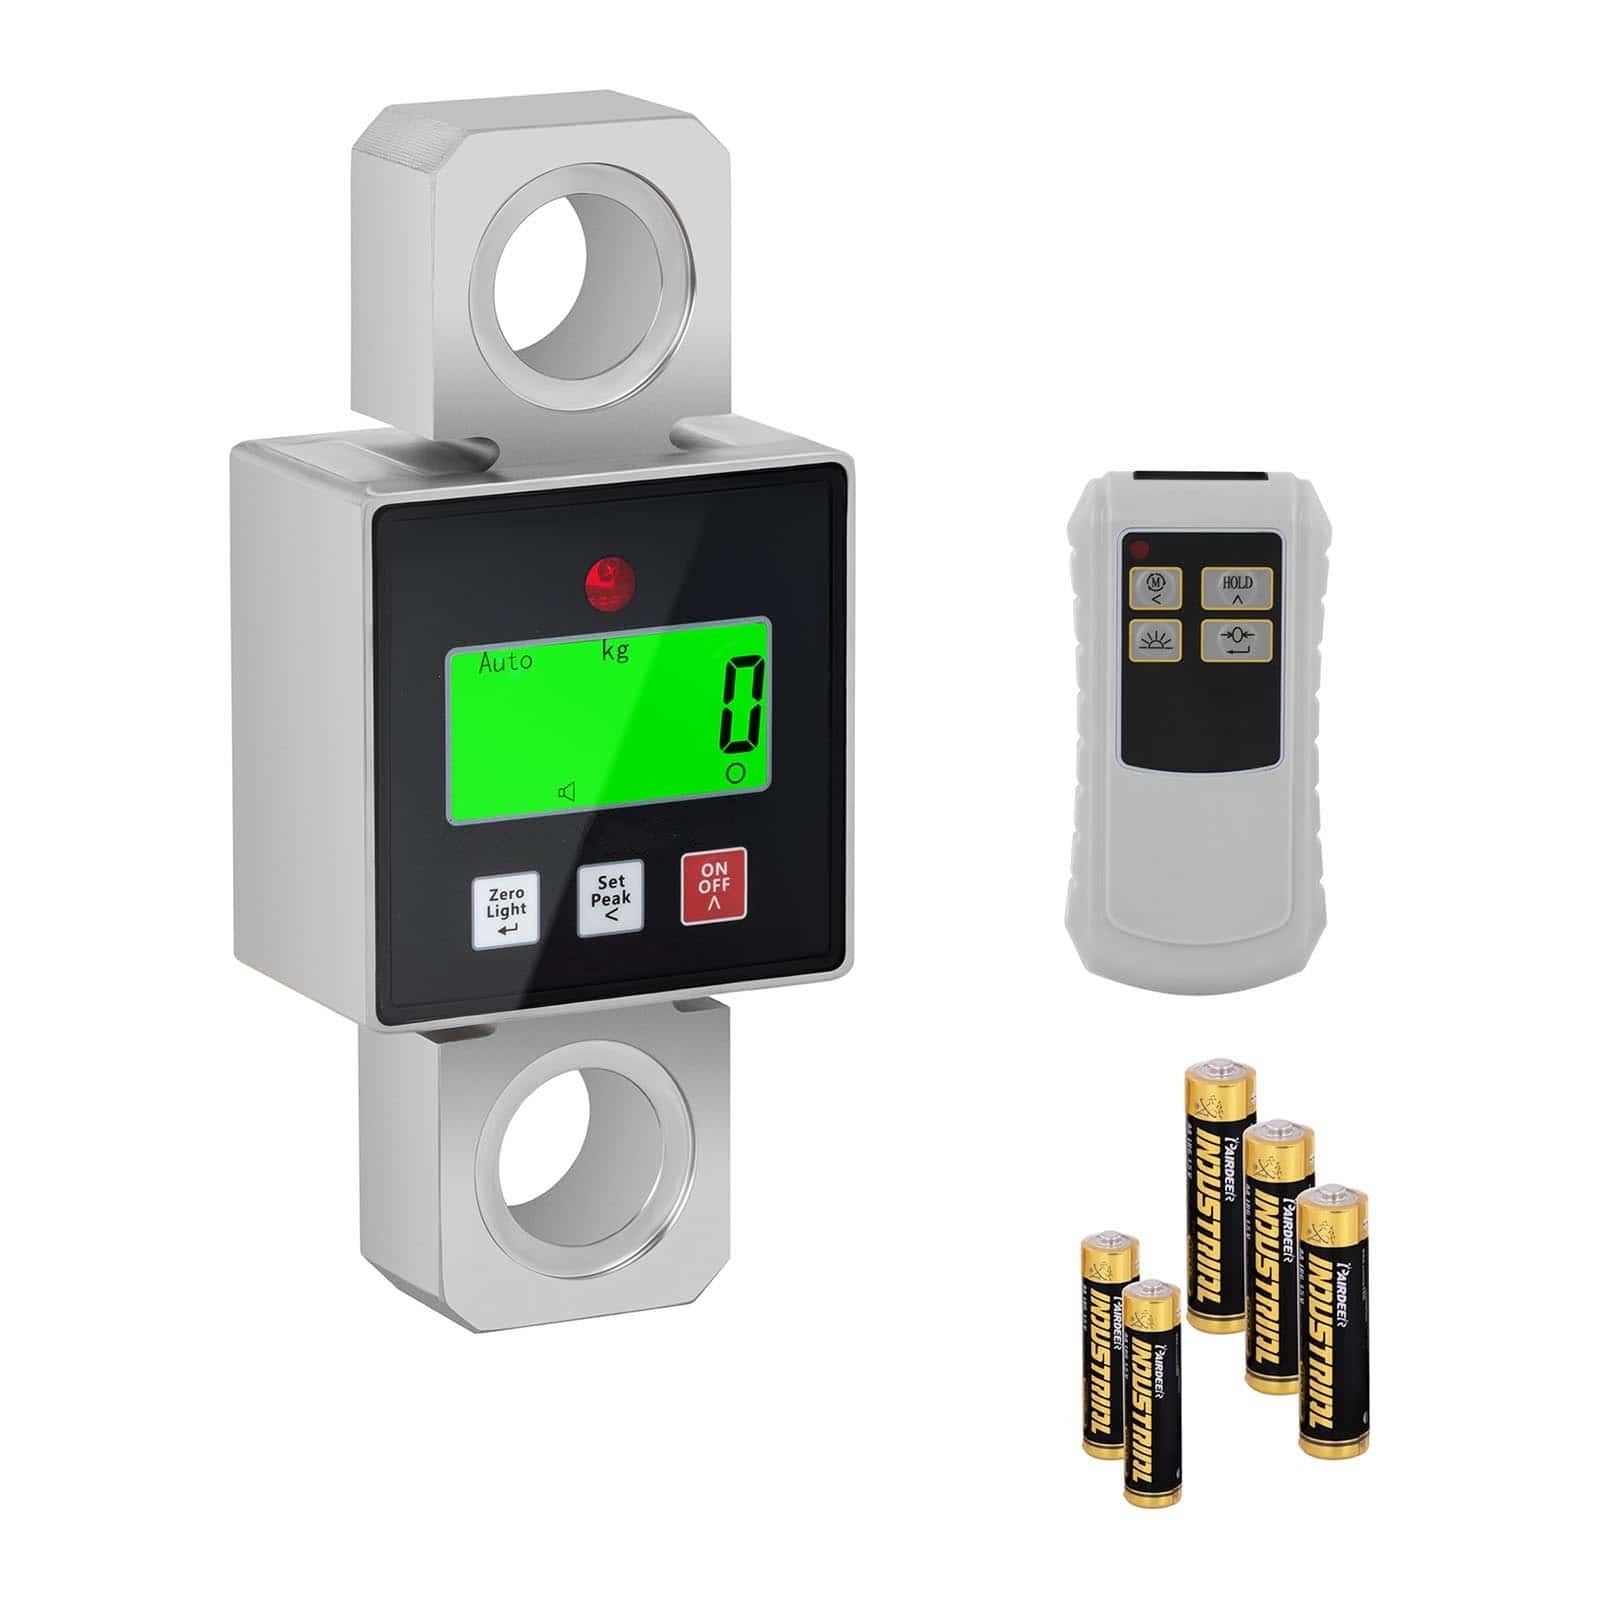 3t/50t load-Link Dynamometer IP64 Anodized Corrosion-Resistant LCD Display.